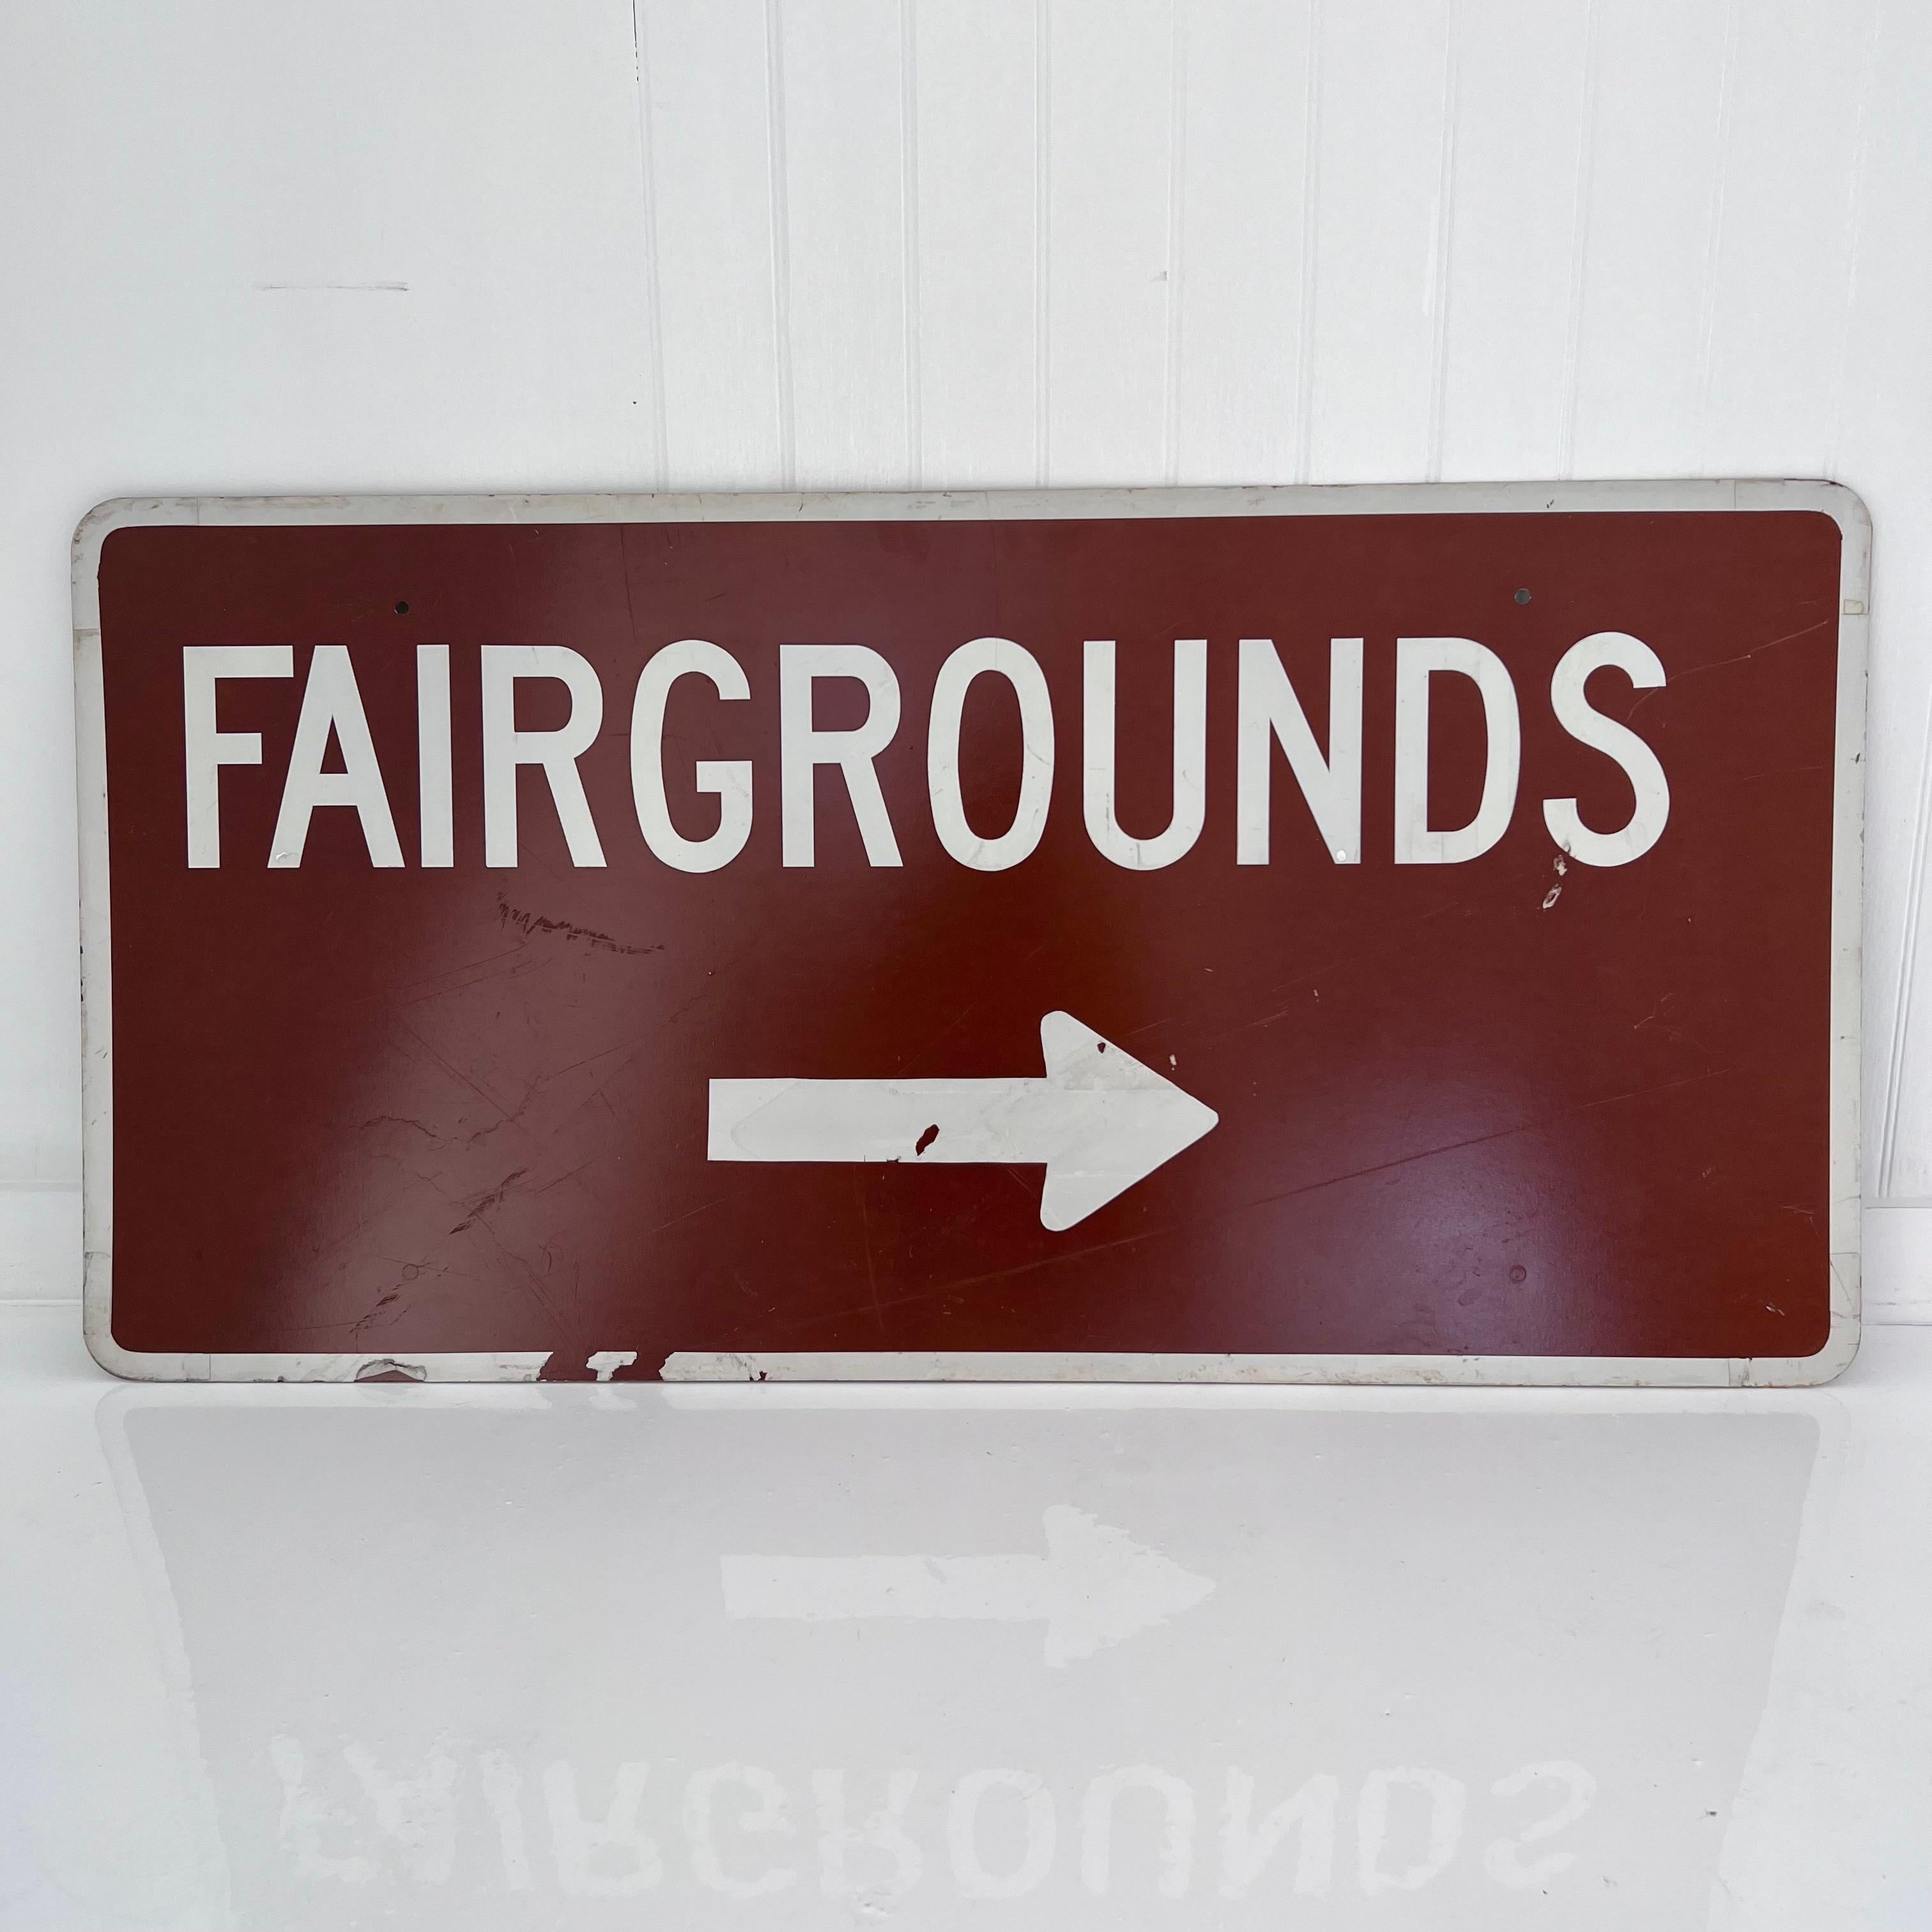 Vintage 1980s Fairgrounds sign in a unique and bold oxblood base color with white font. Eye catching and fun, this piece has the trappings of Americana wall art. Slight scuffs and scratches on the sign only add to its unique antique feel. An item